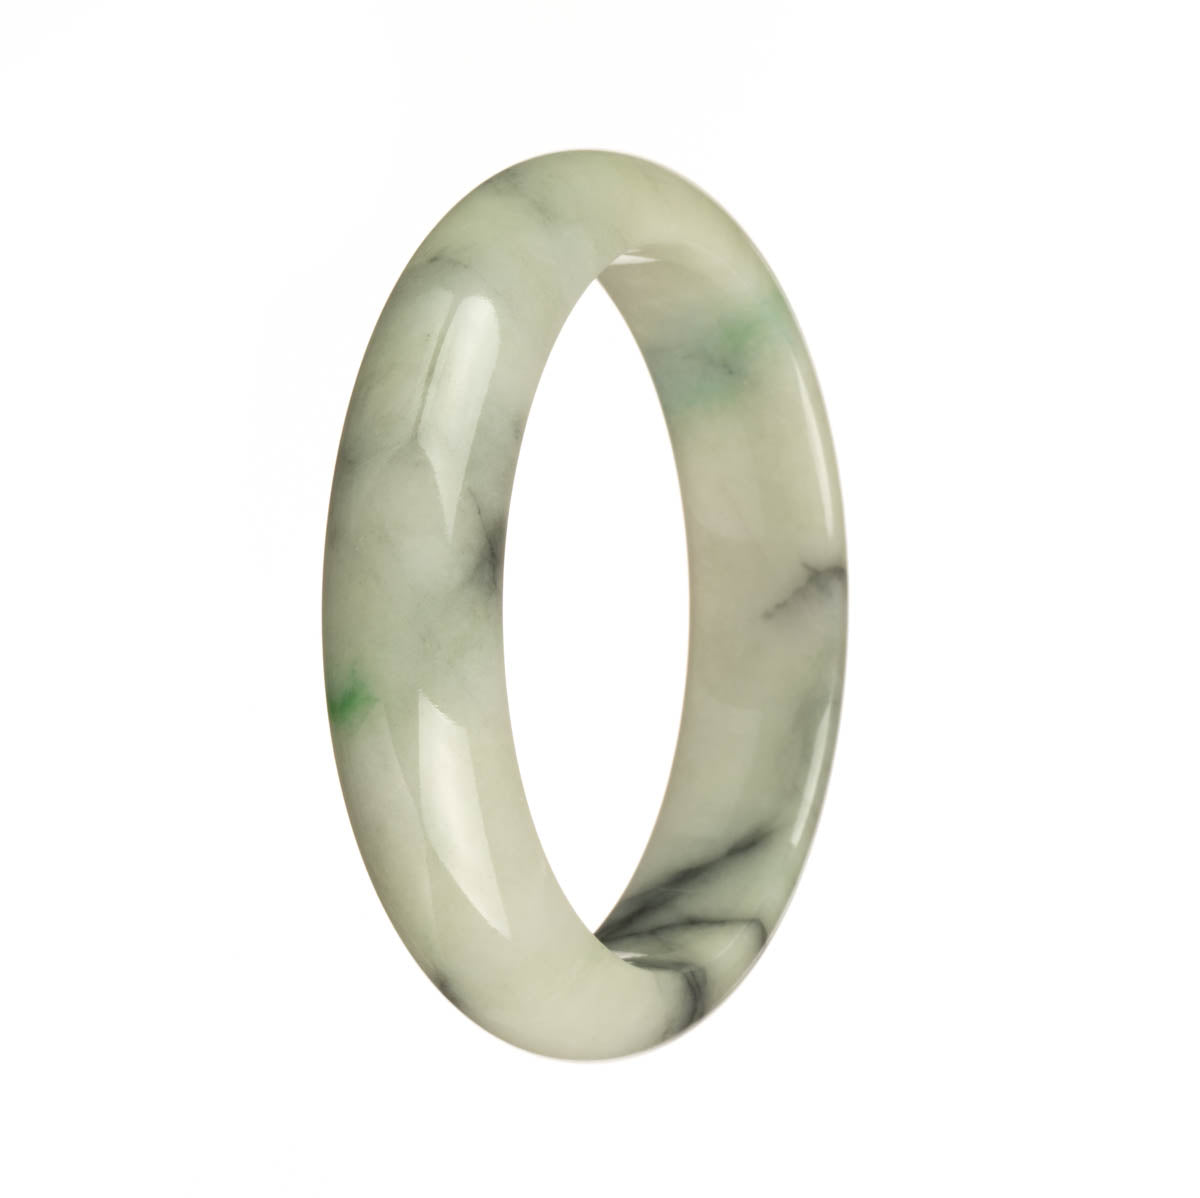 Authentic Untreated White with Black and Apple Green Patterns Jadeite Jade Bracelet - 57mm Half Moon